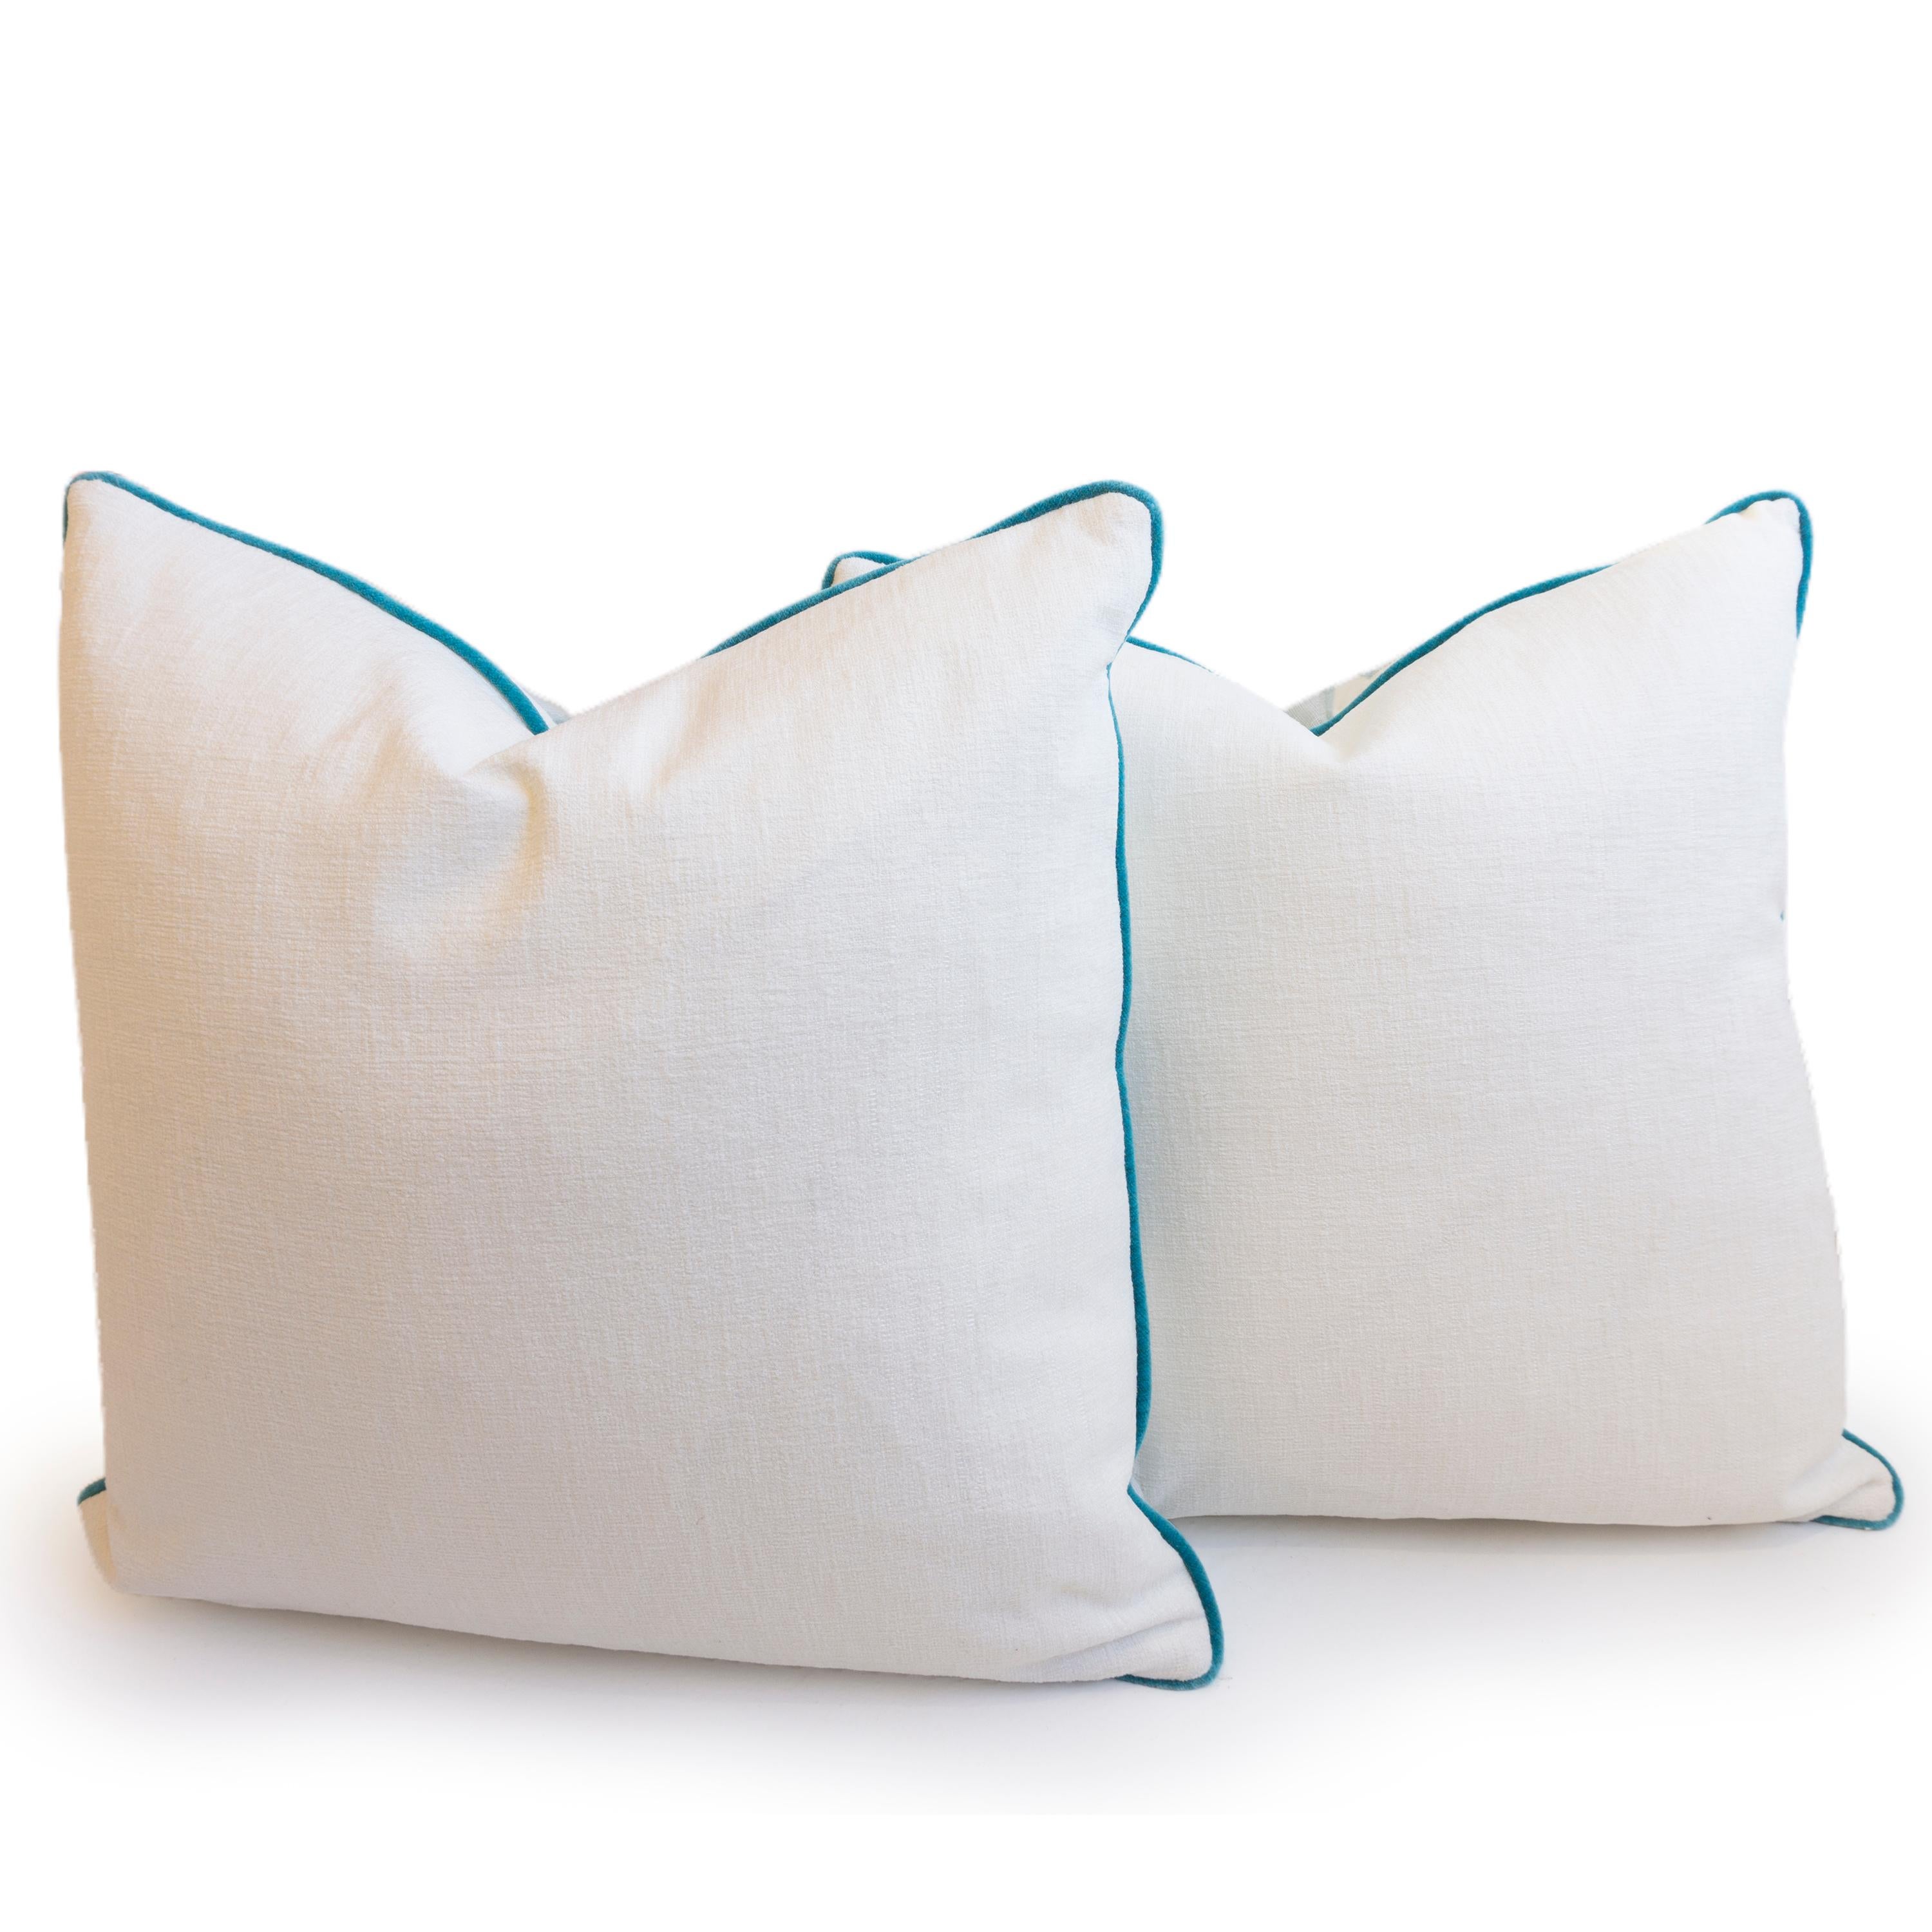 A pair of pillows hand sewn in a blue geometric patterned linen and blue velvet trim. 

Measurements: 21” x 21”.